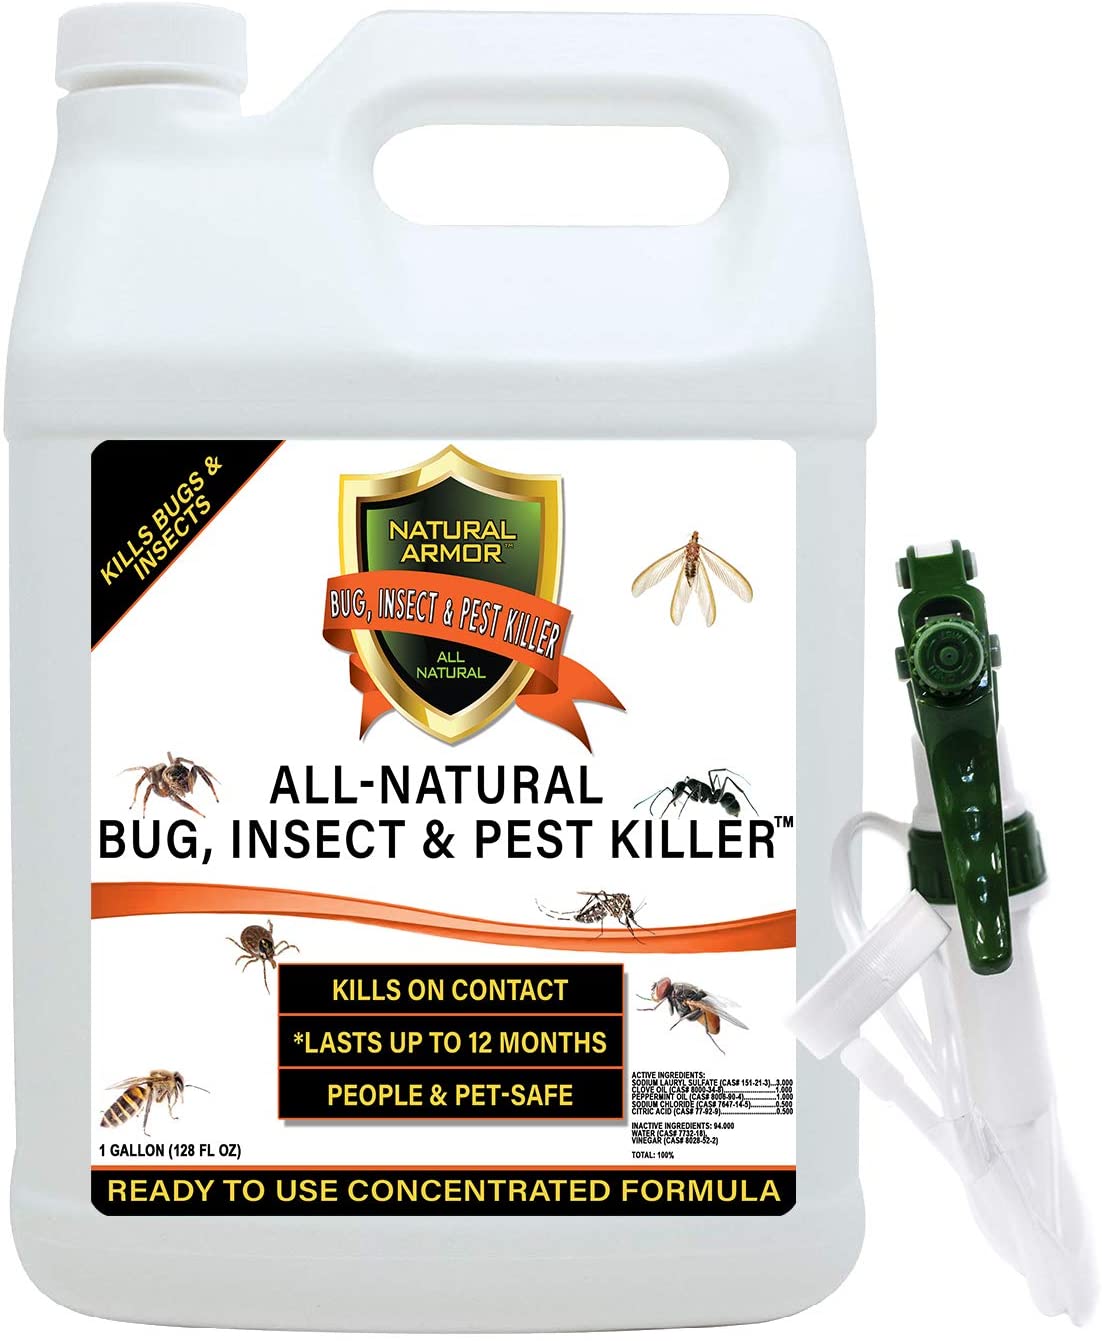 Natural Armor Bug and Insect Killer Spray